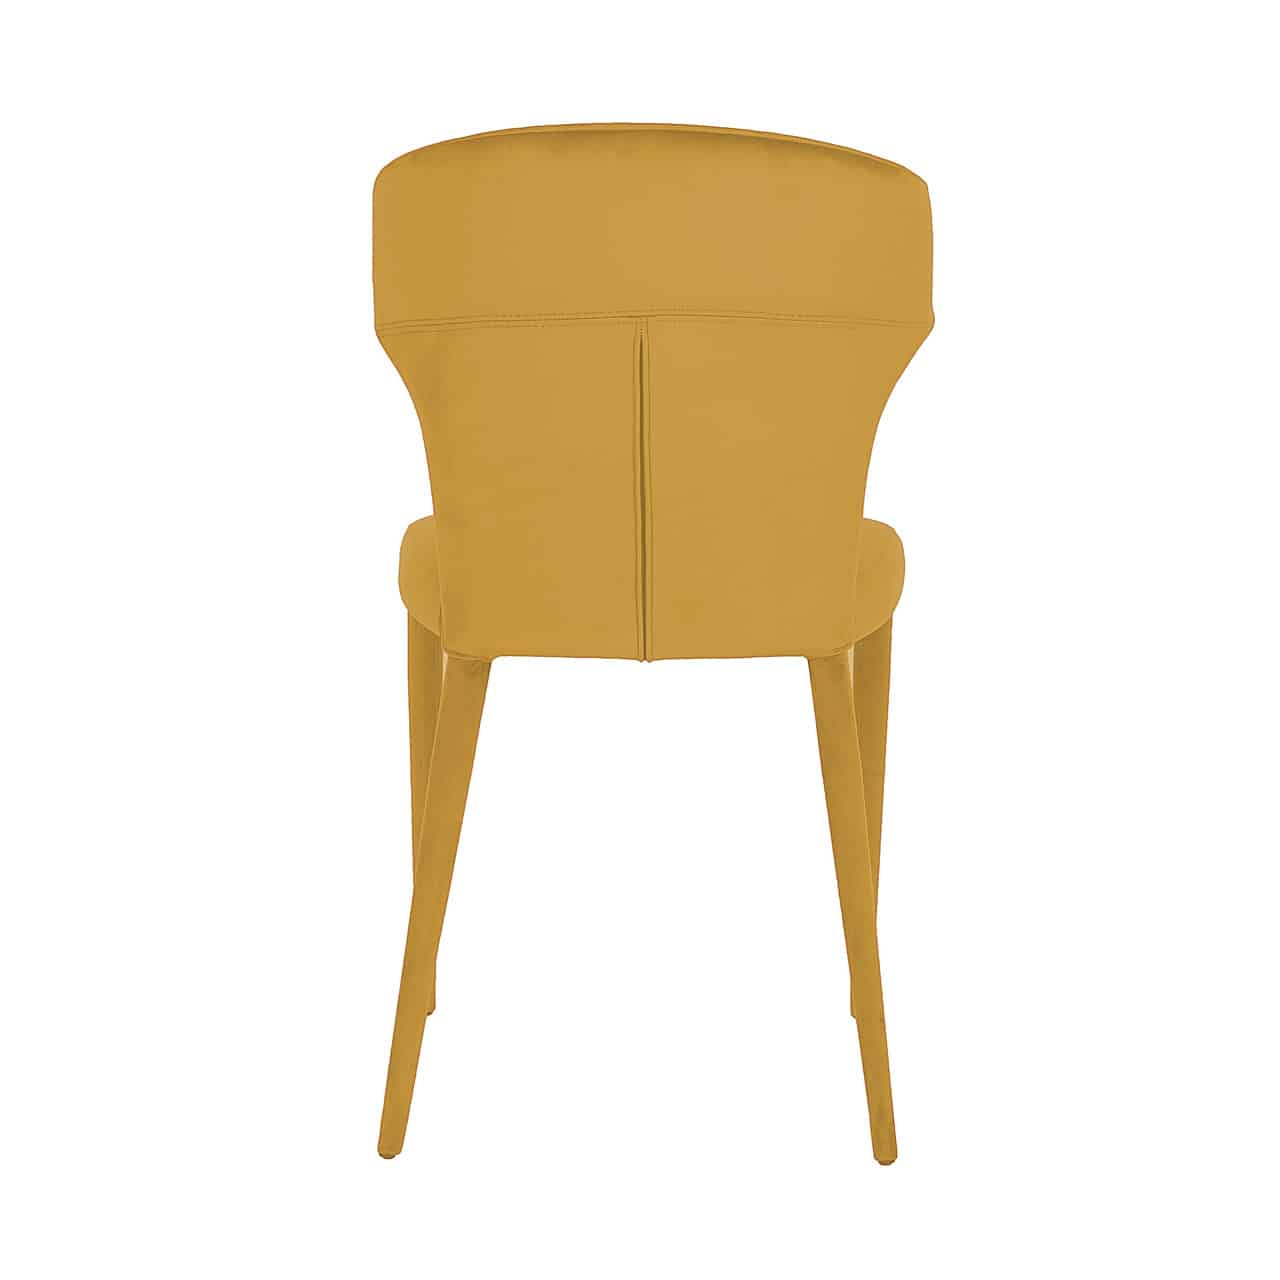 PIPER chair yellow